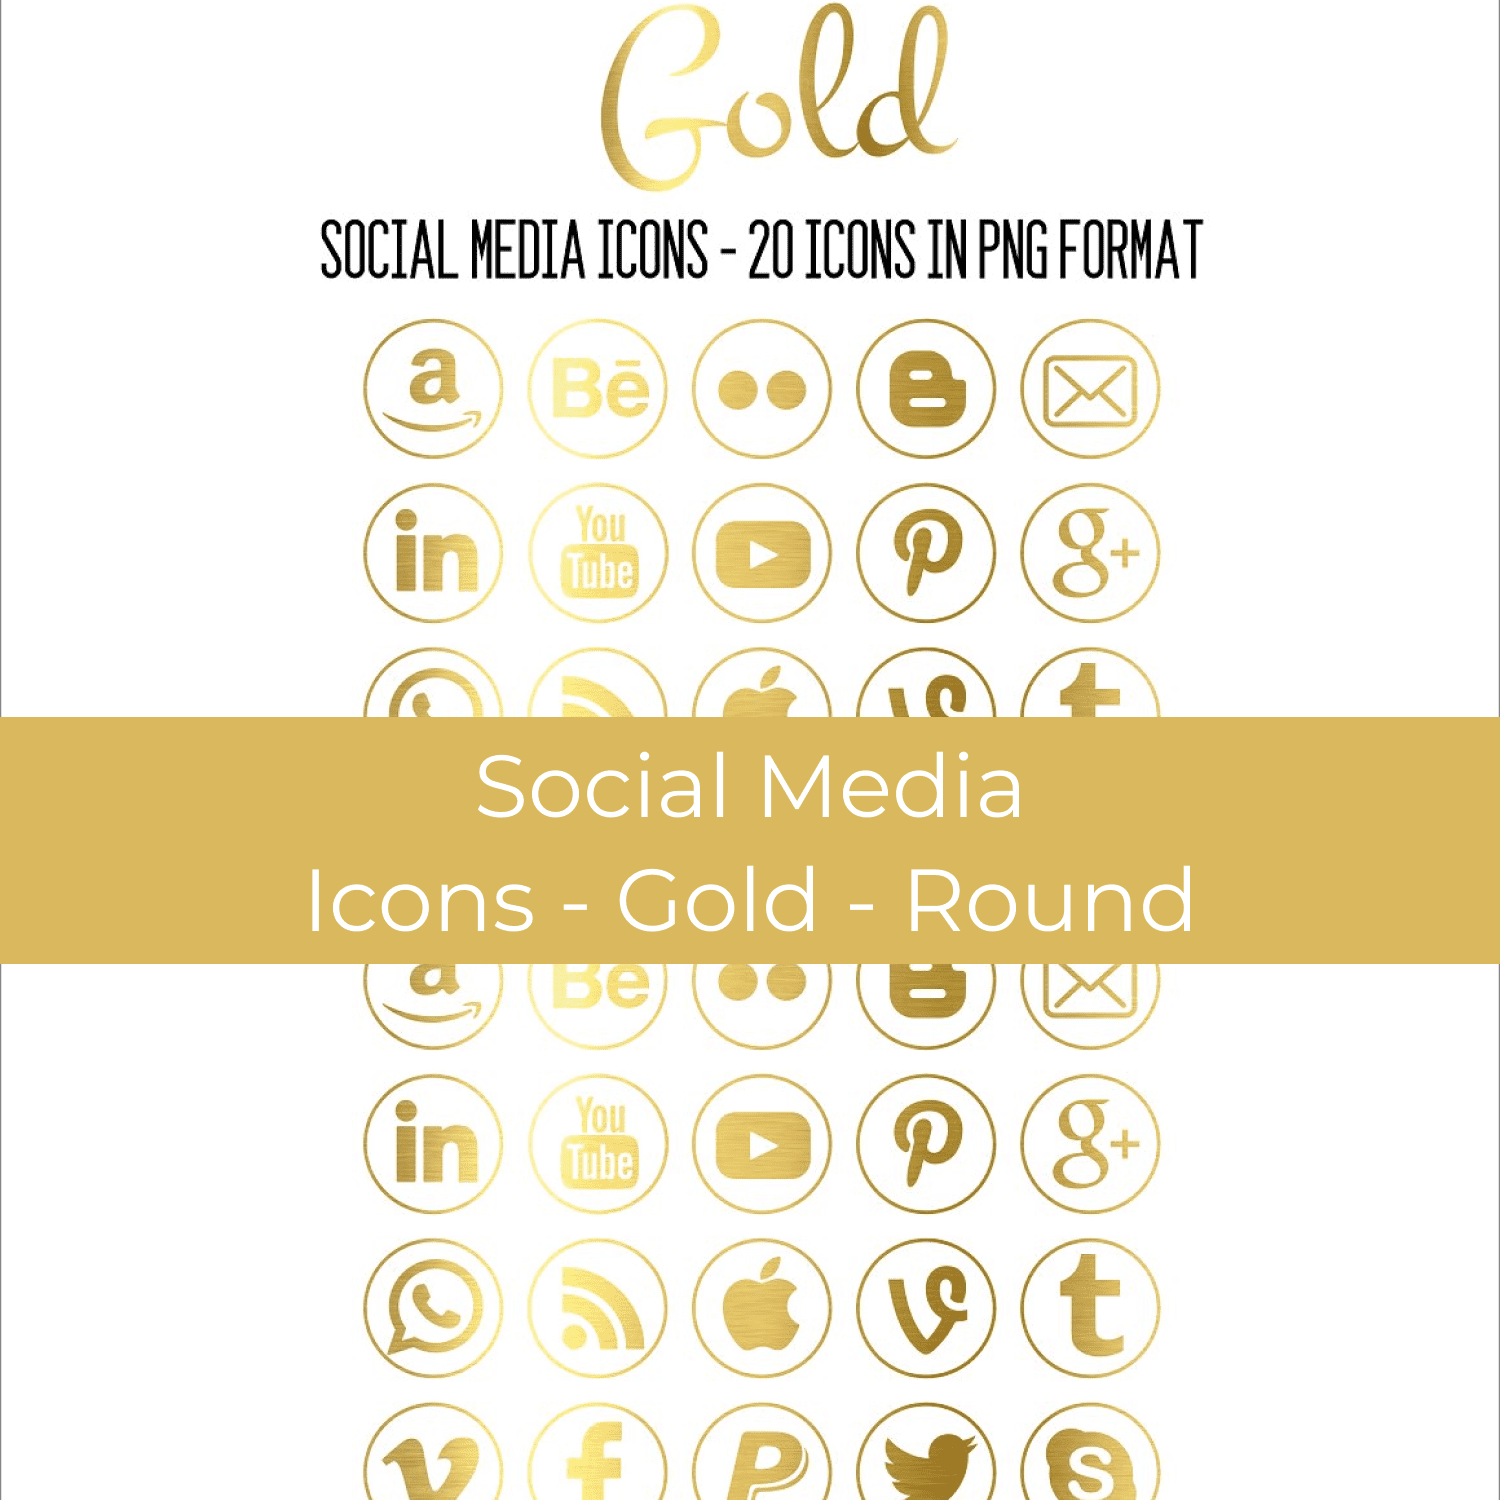 Gold Round Social Media Icons cover image.